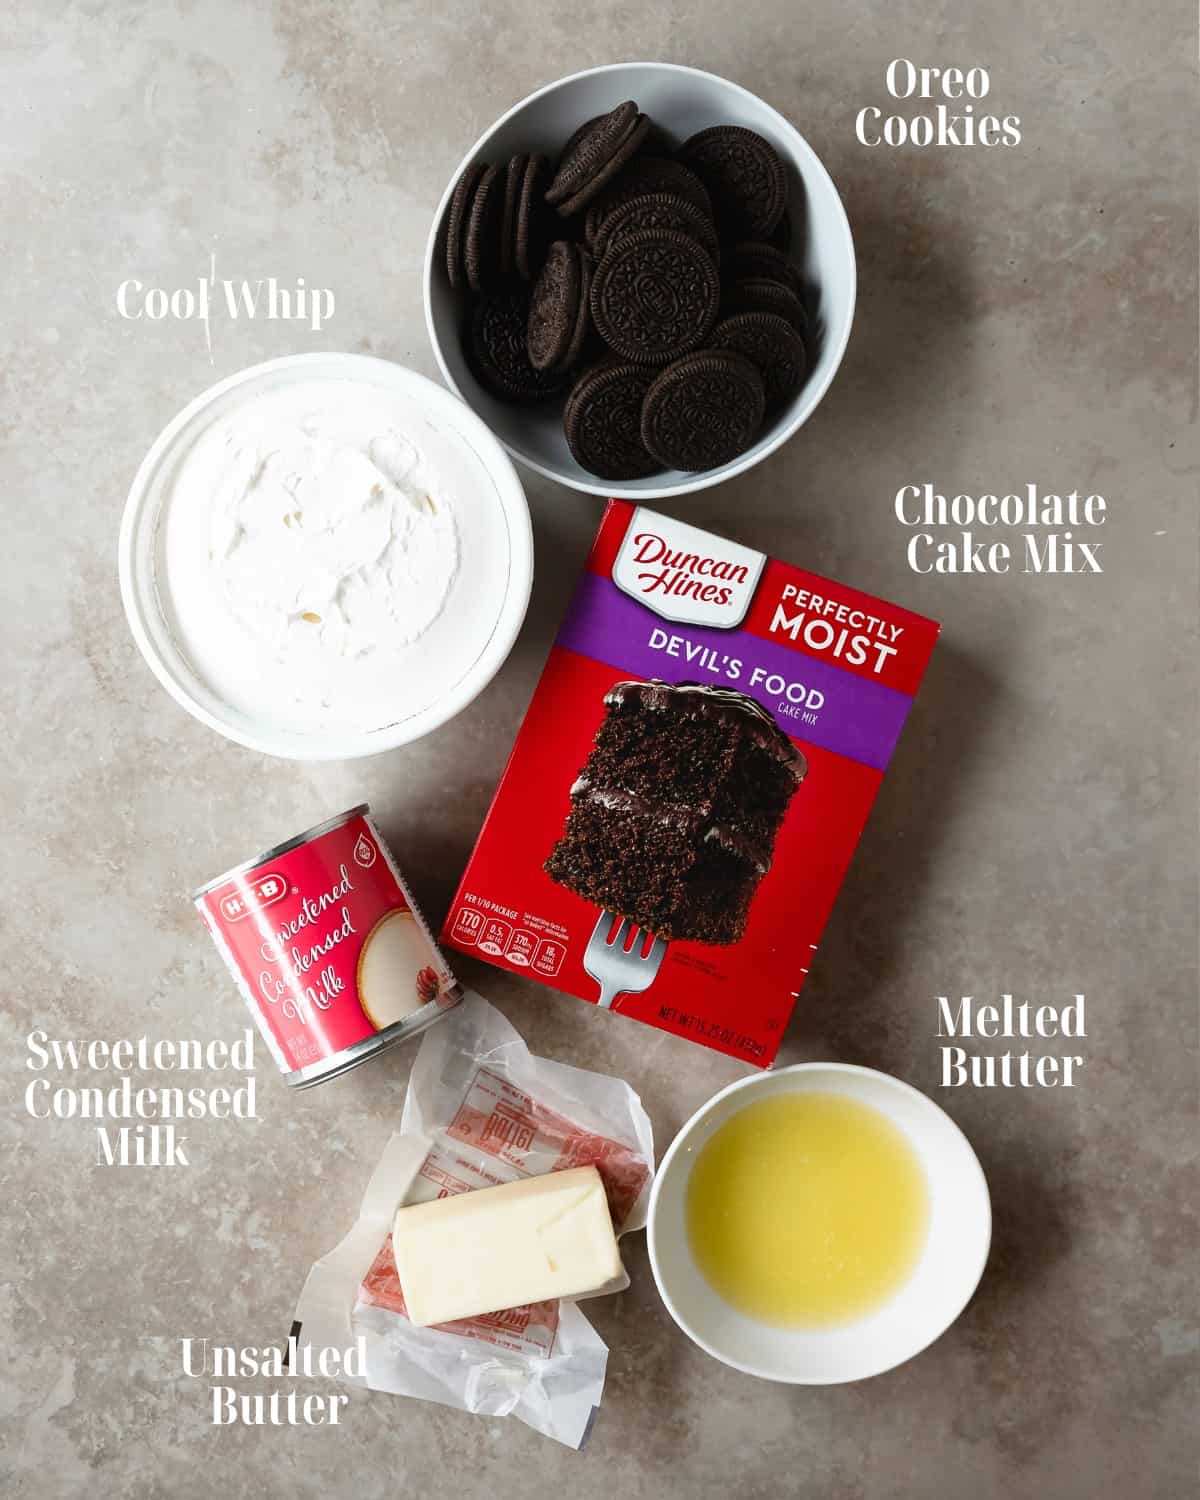 Gather Oreo cookies, sweetened condensed milk, chocolate cake mix, cool whip and butter. 